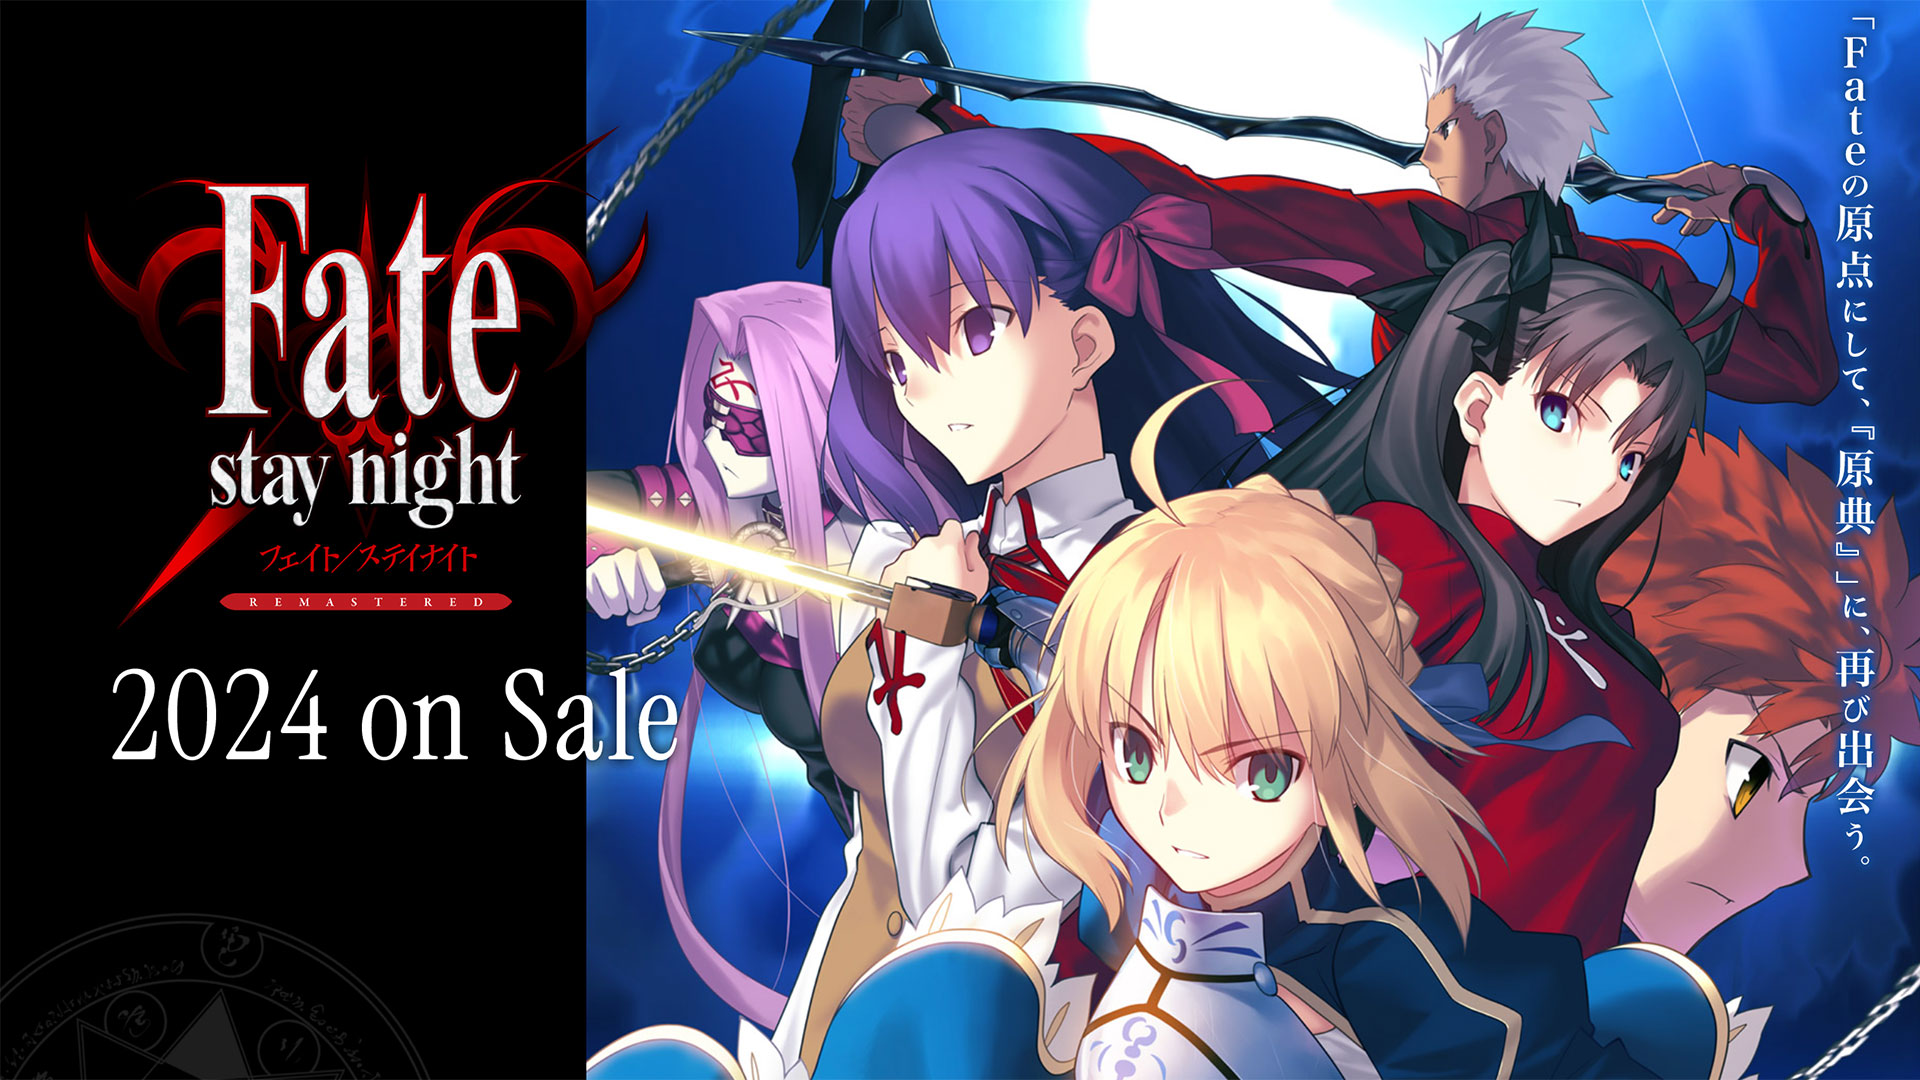 Fate/Stay Night Remastered is heading to Switch and PC sometime this year